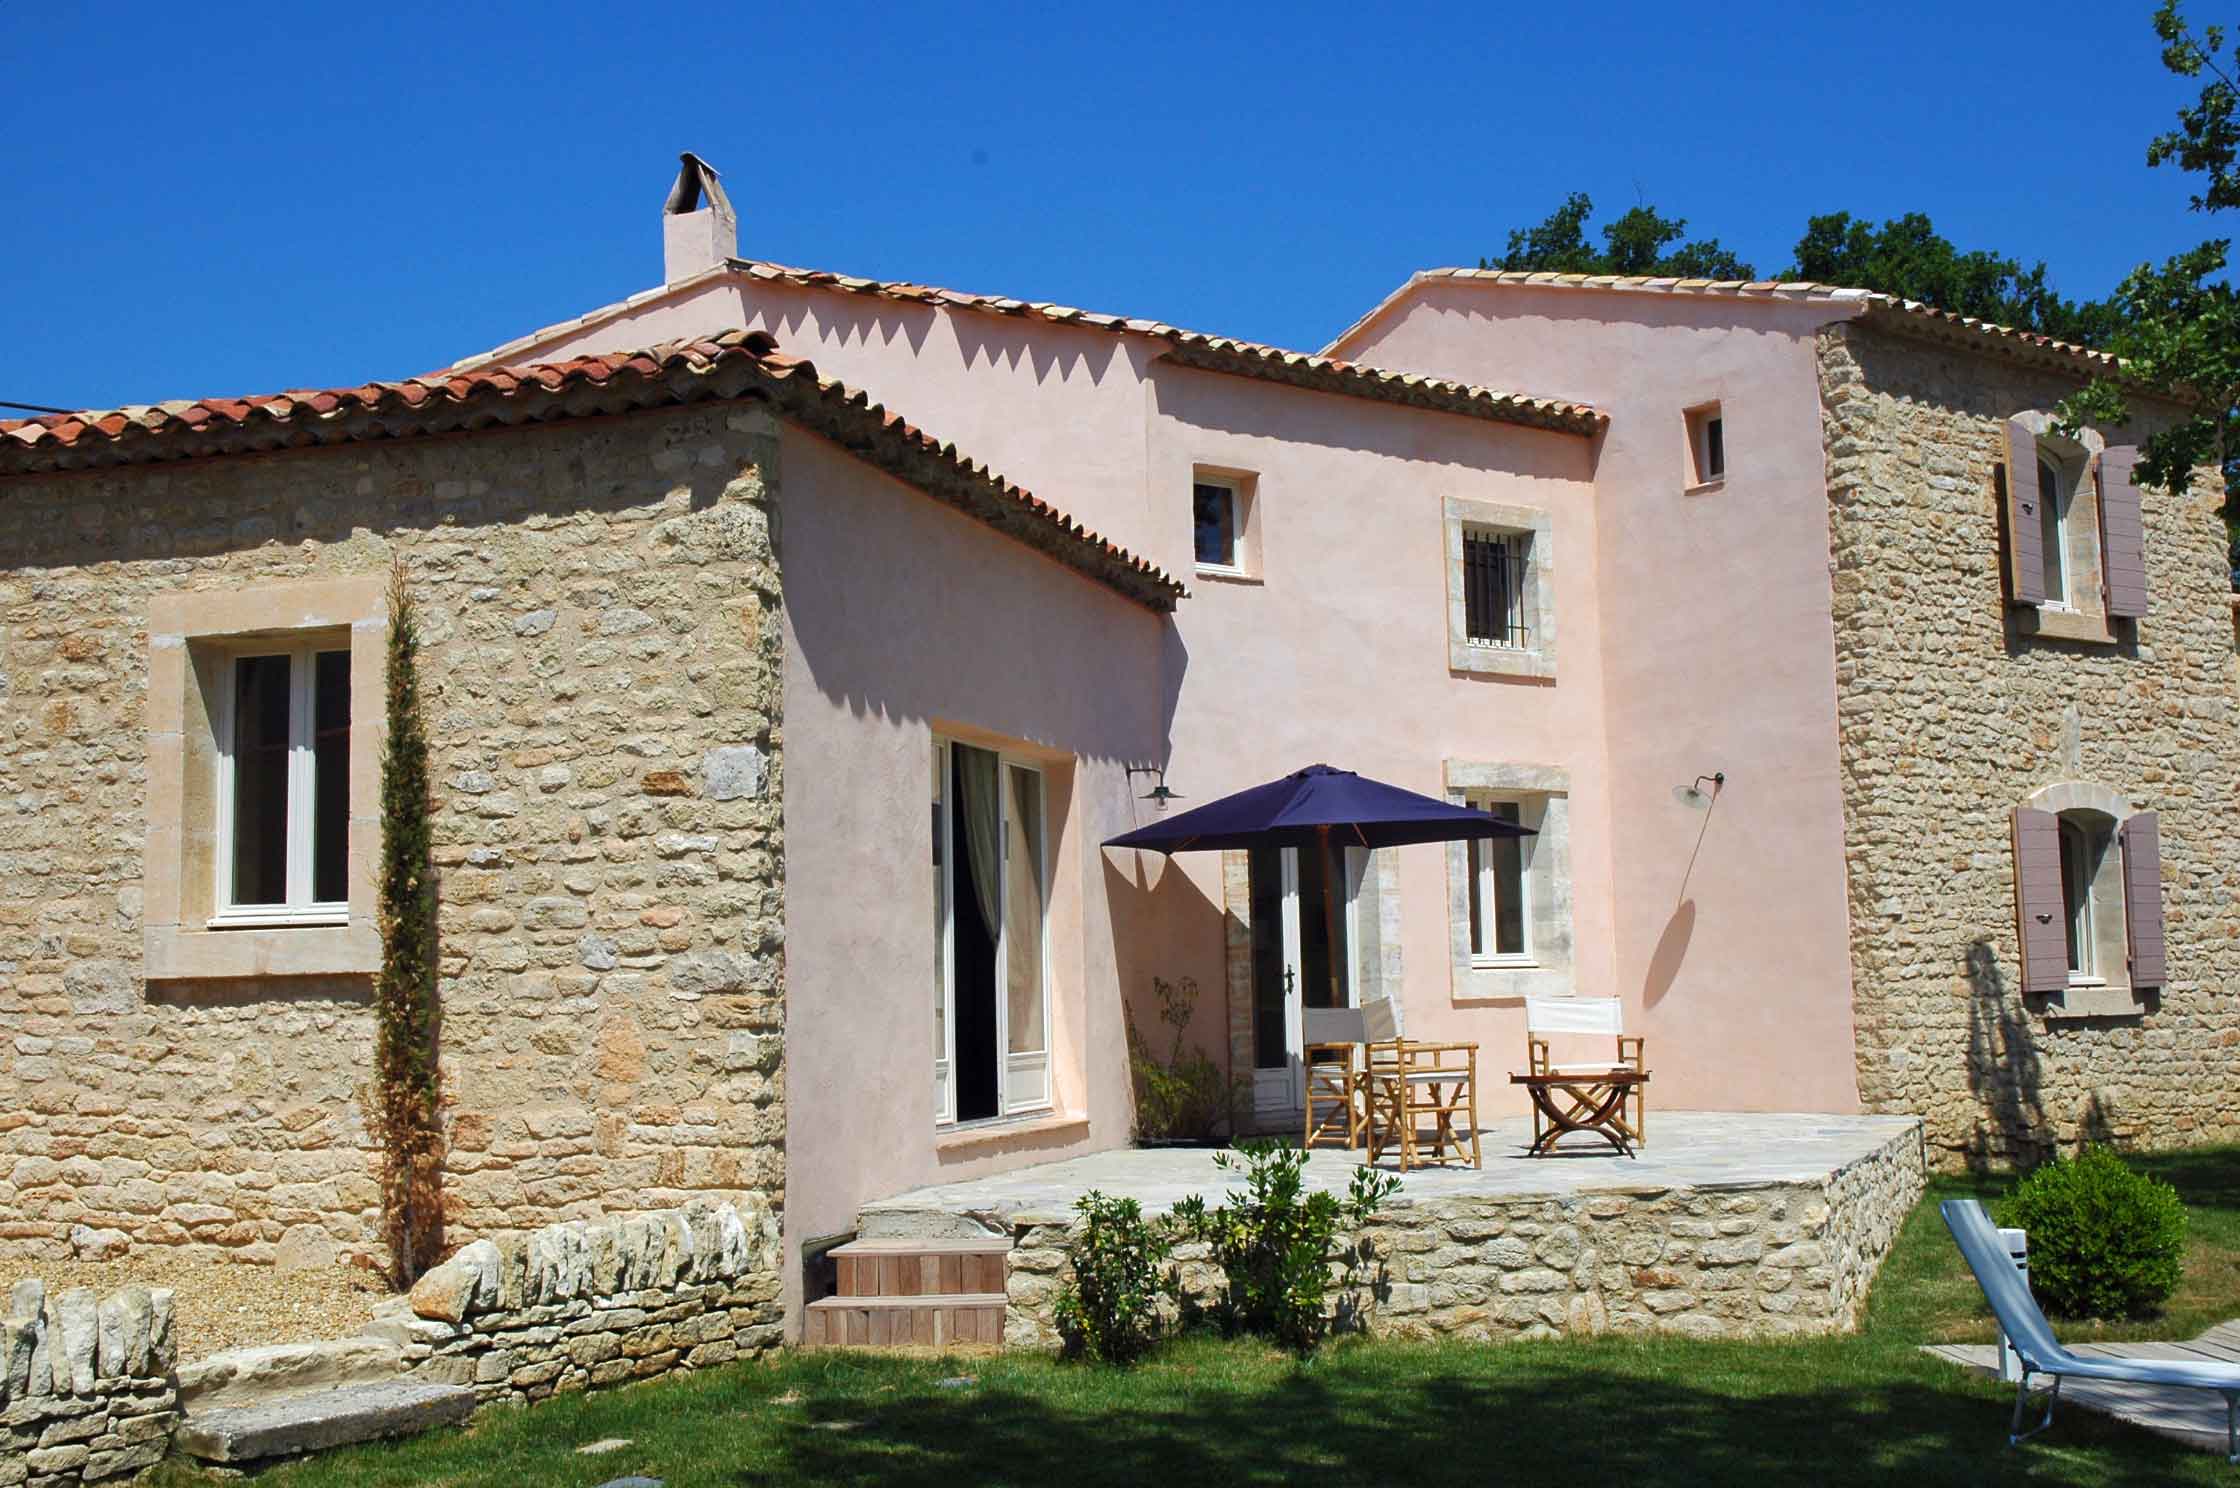 Villa rental in the South of France